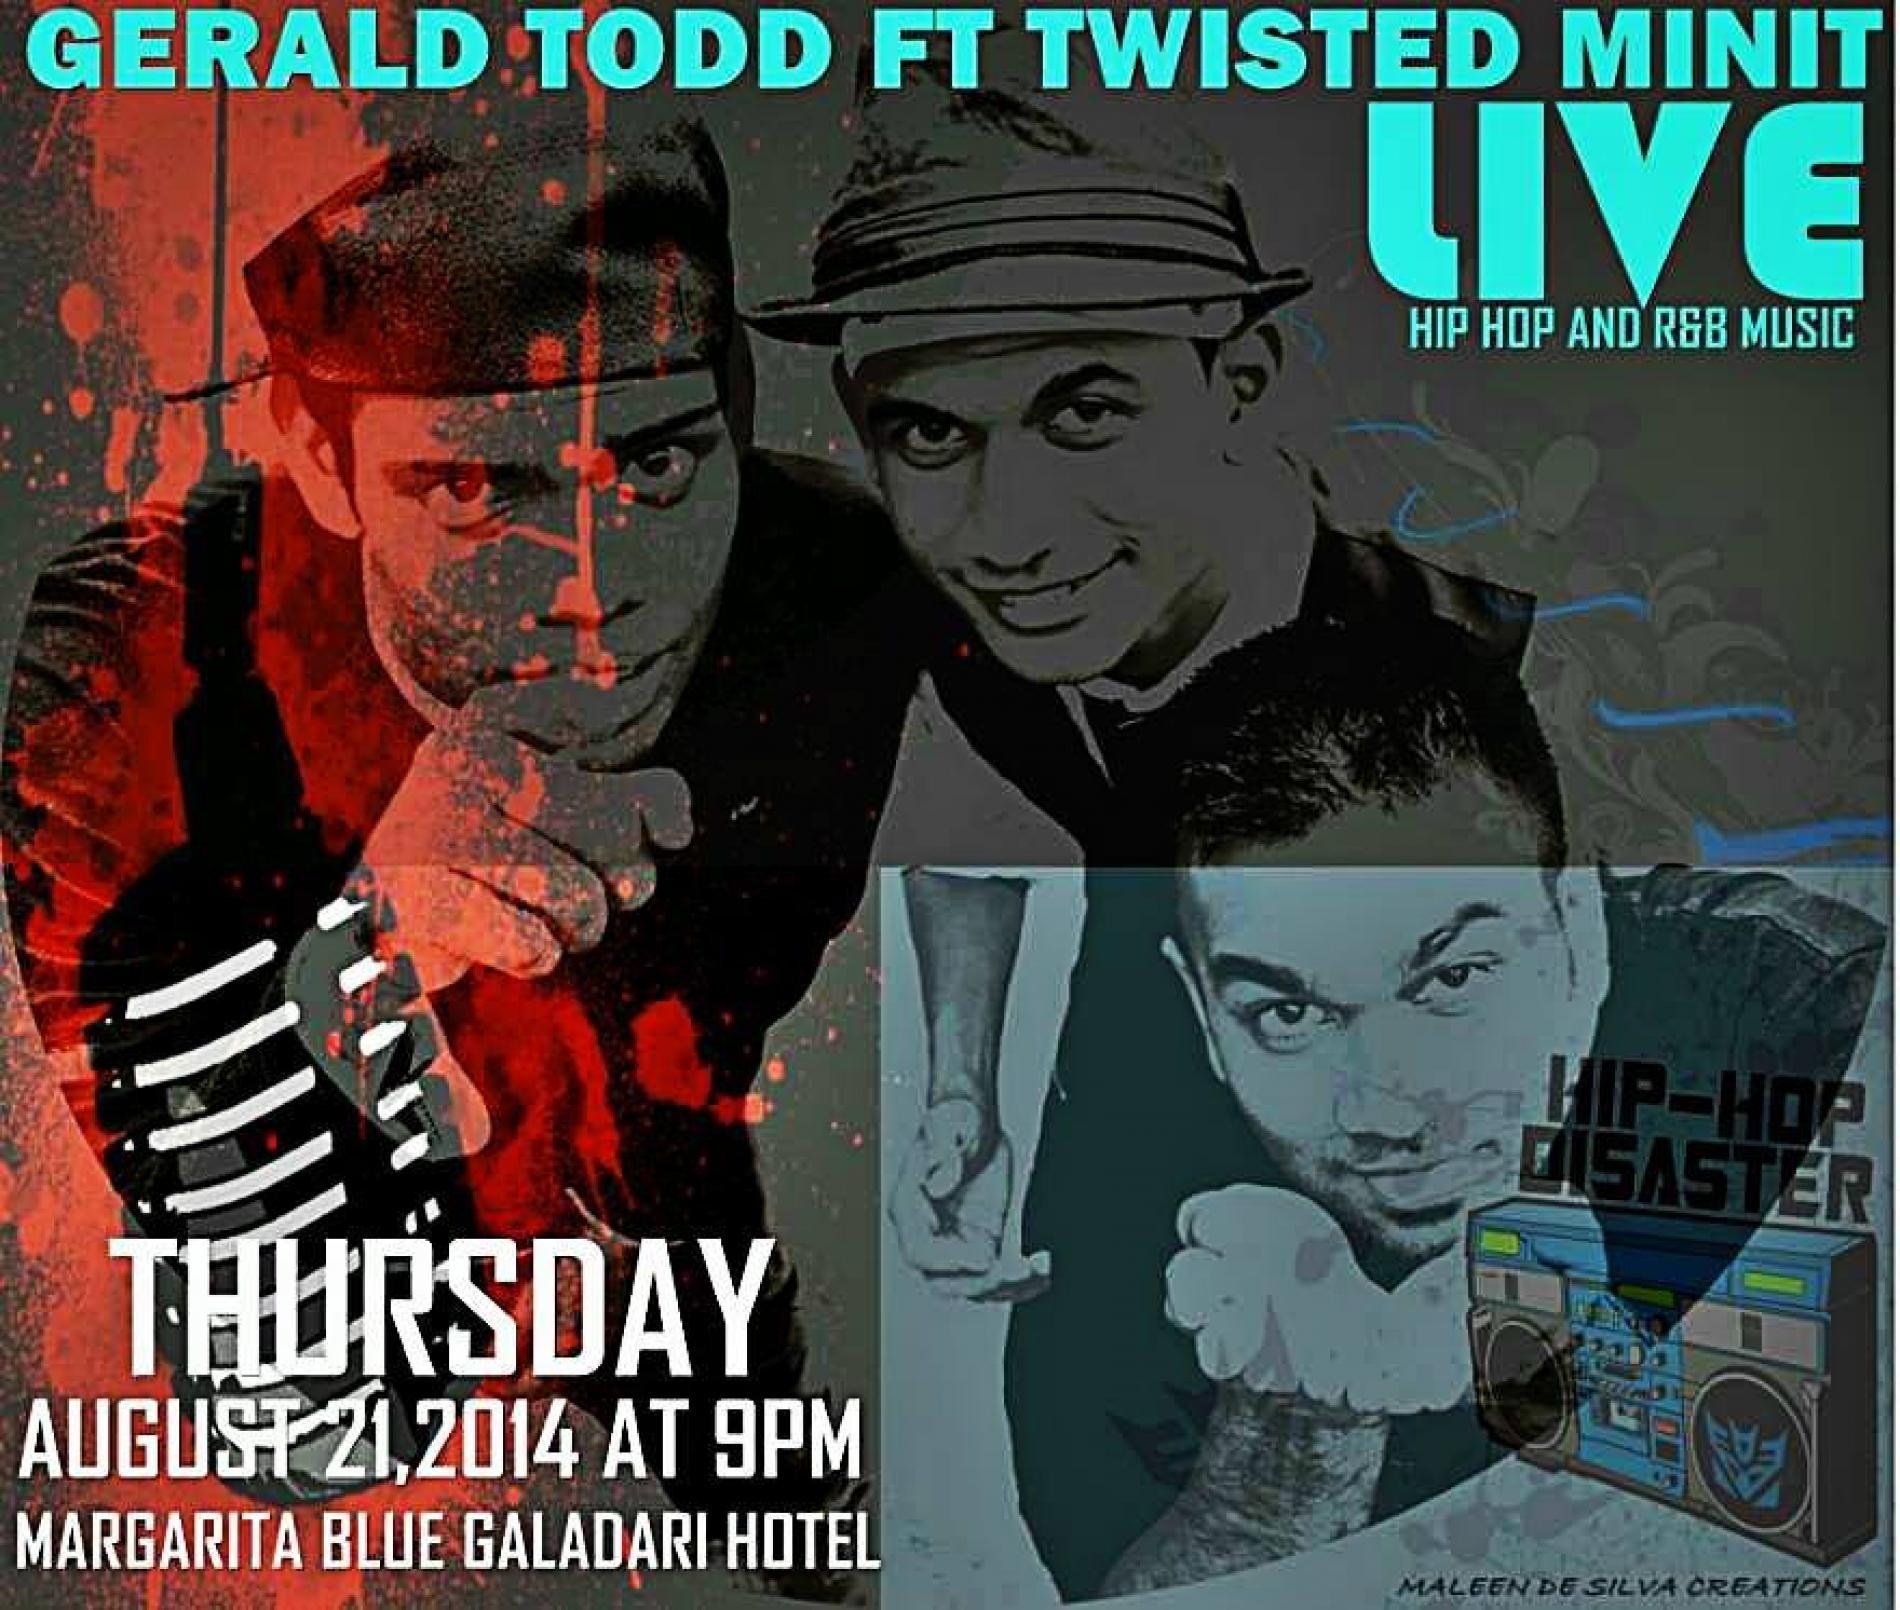 Gerald Todd ft Twisted Minit Live